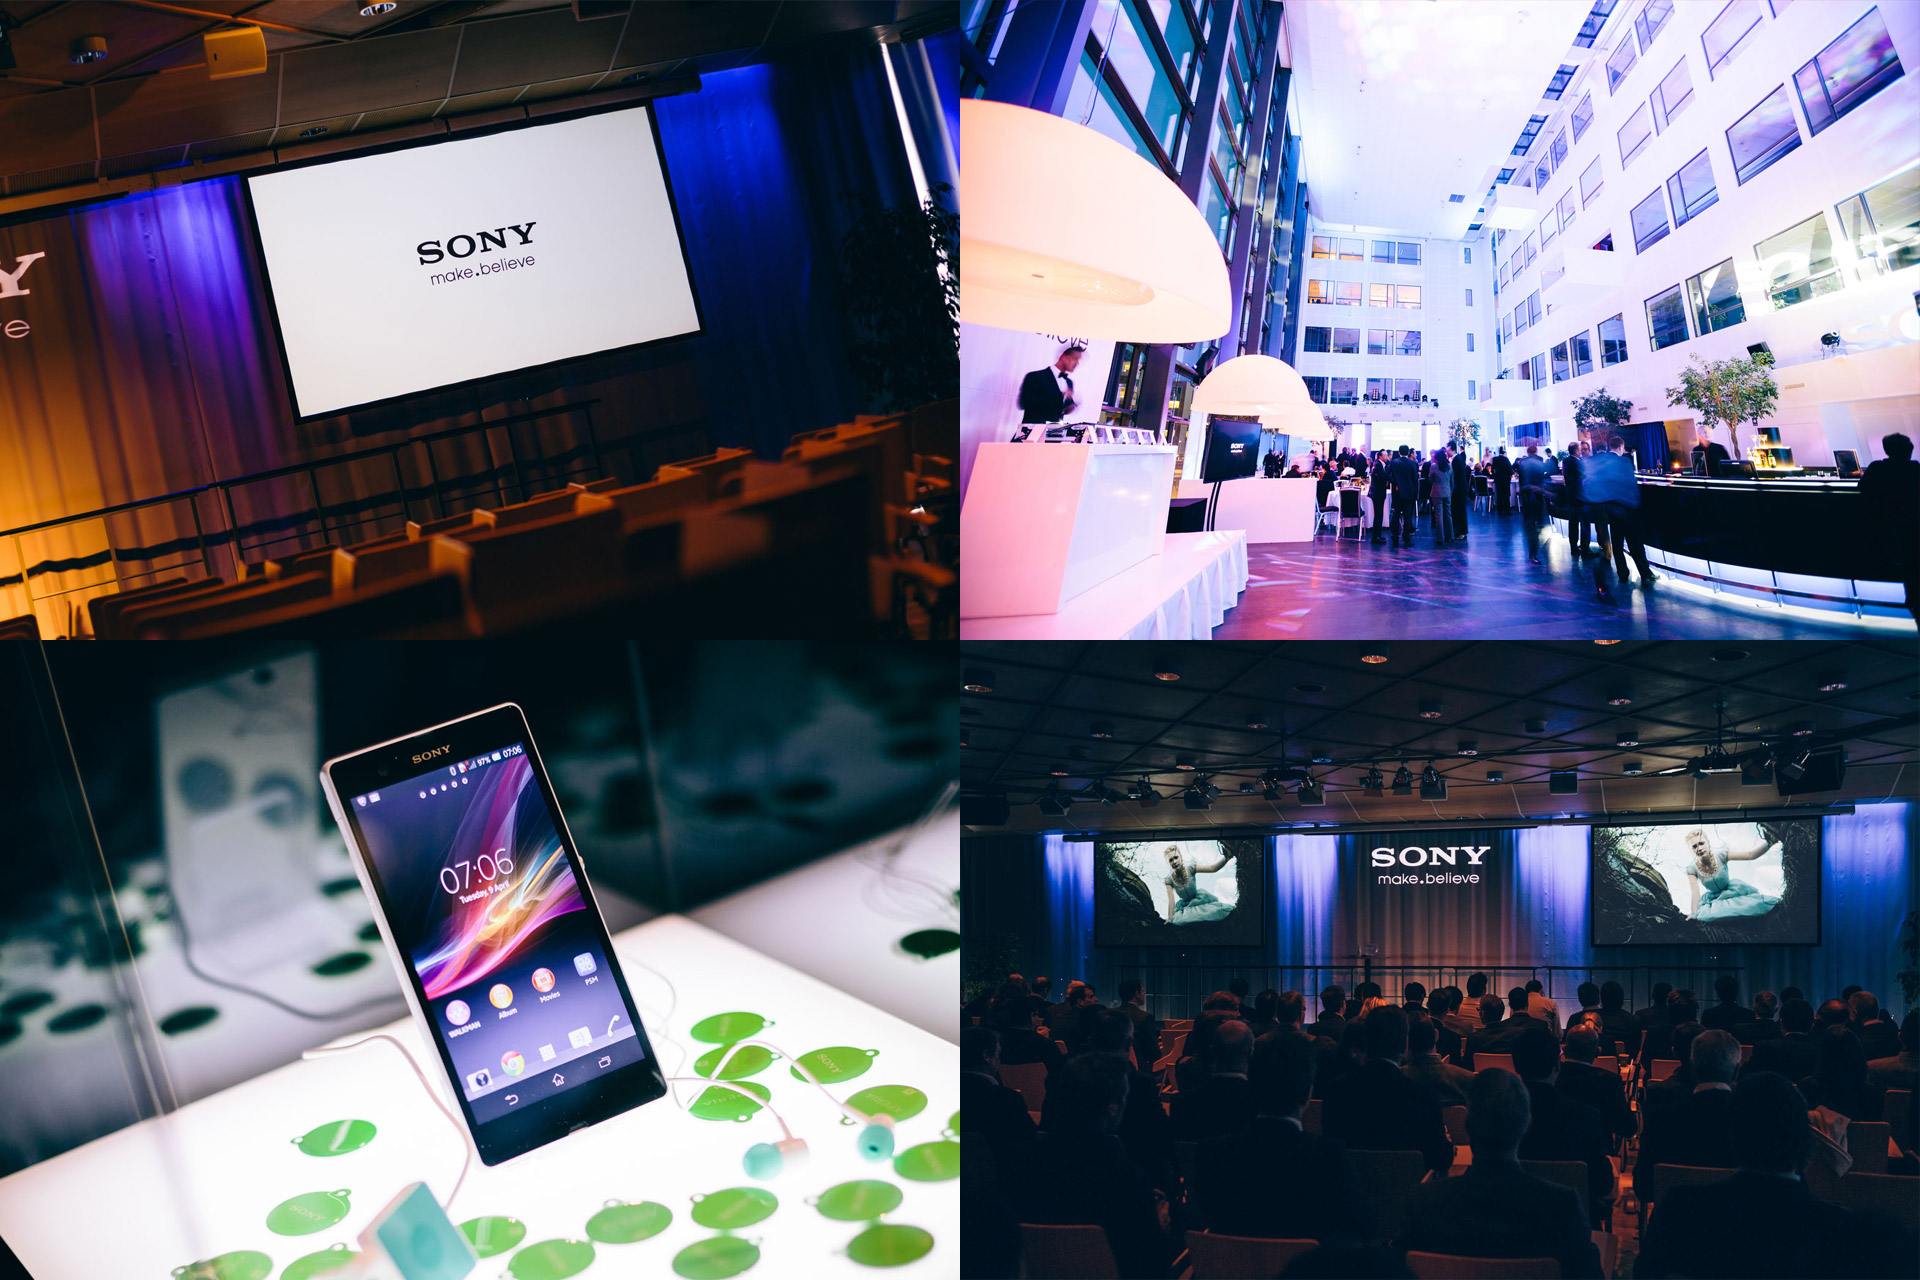 #SONYJAPAN, Brand Experience, Photography, Conferences, Events